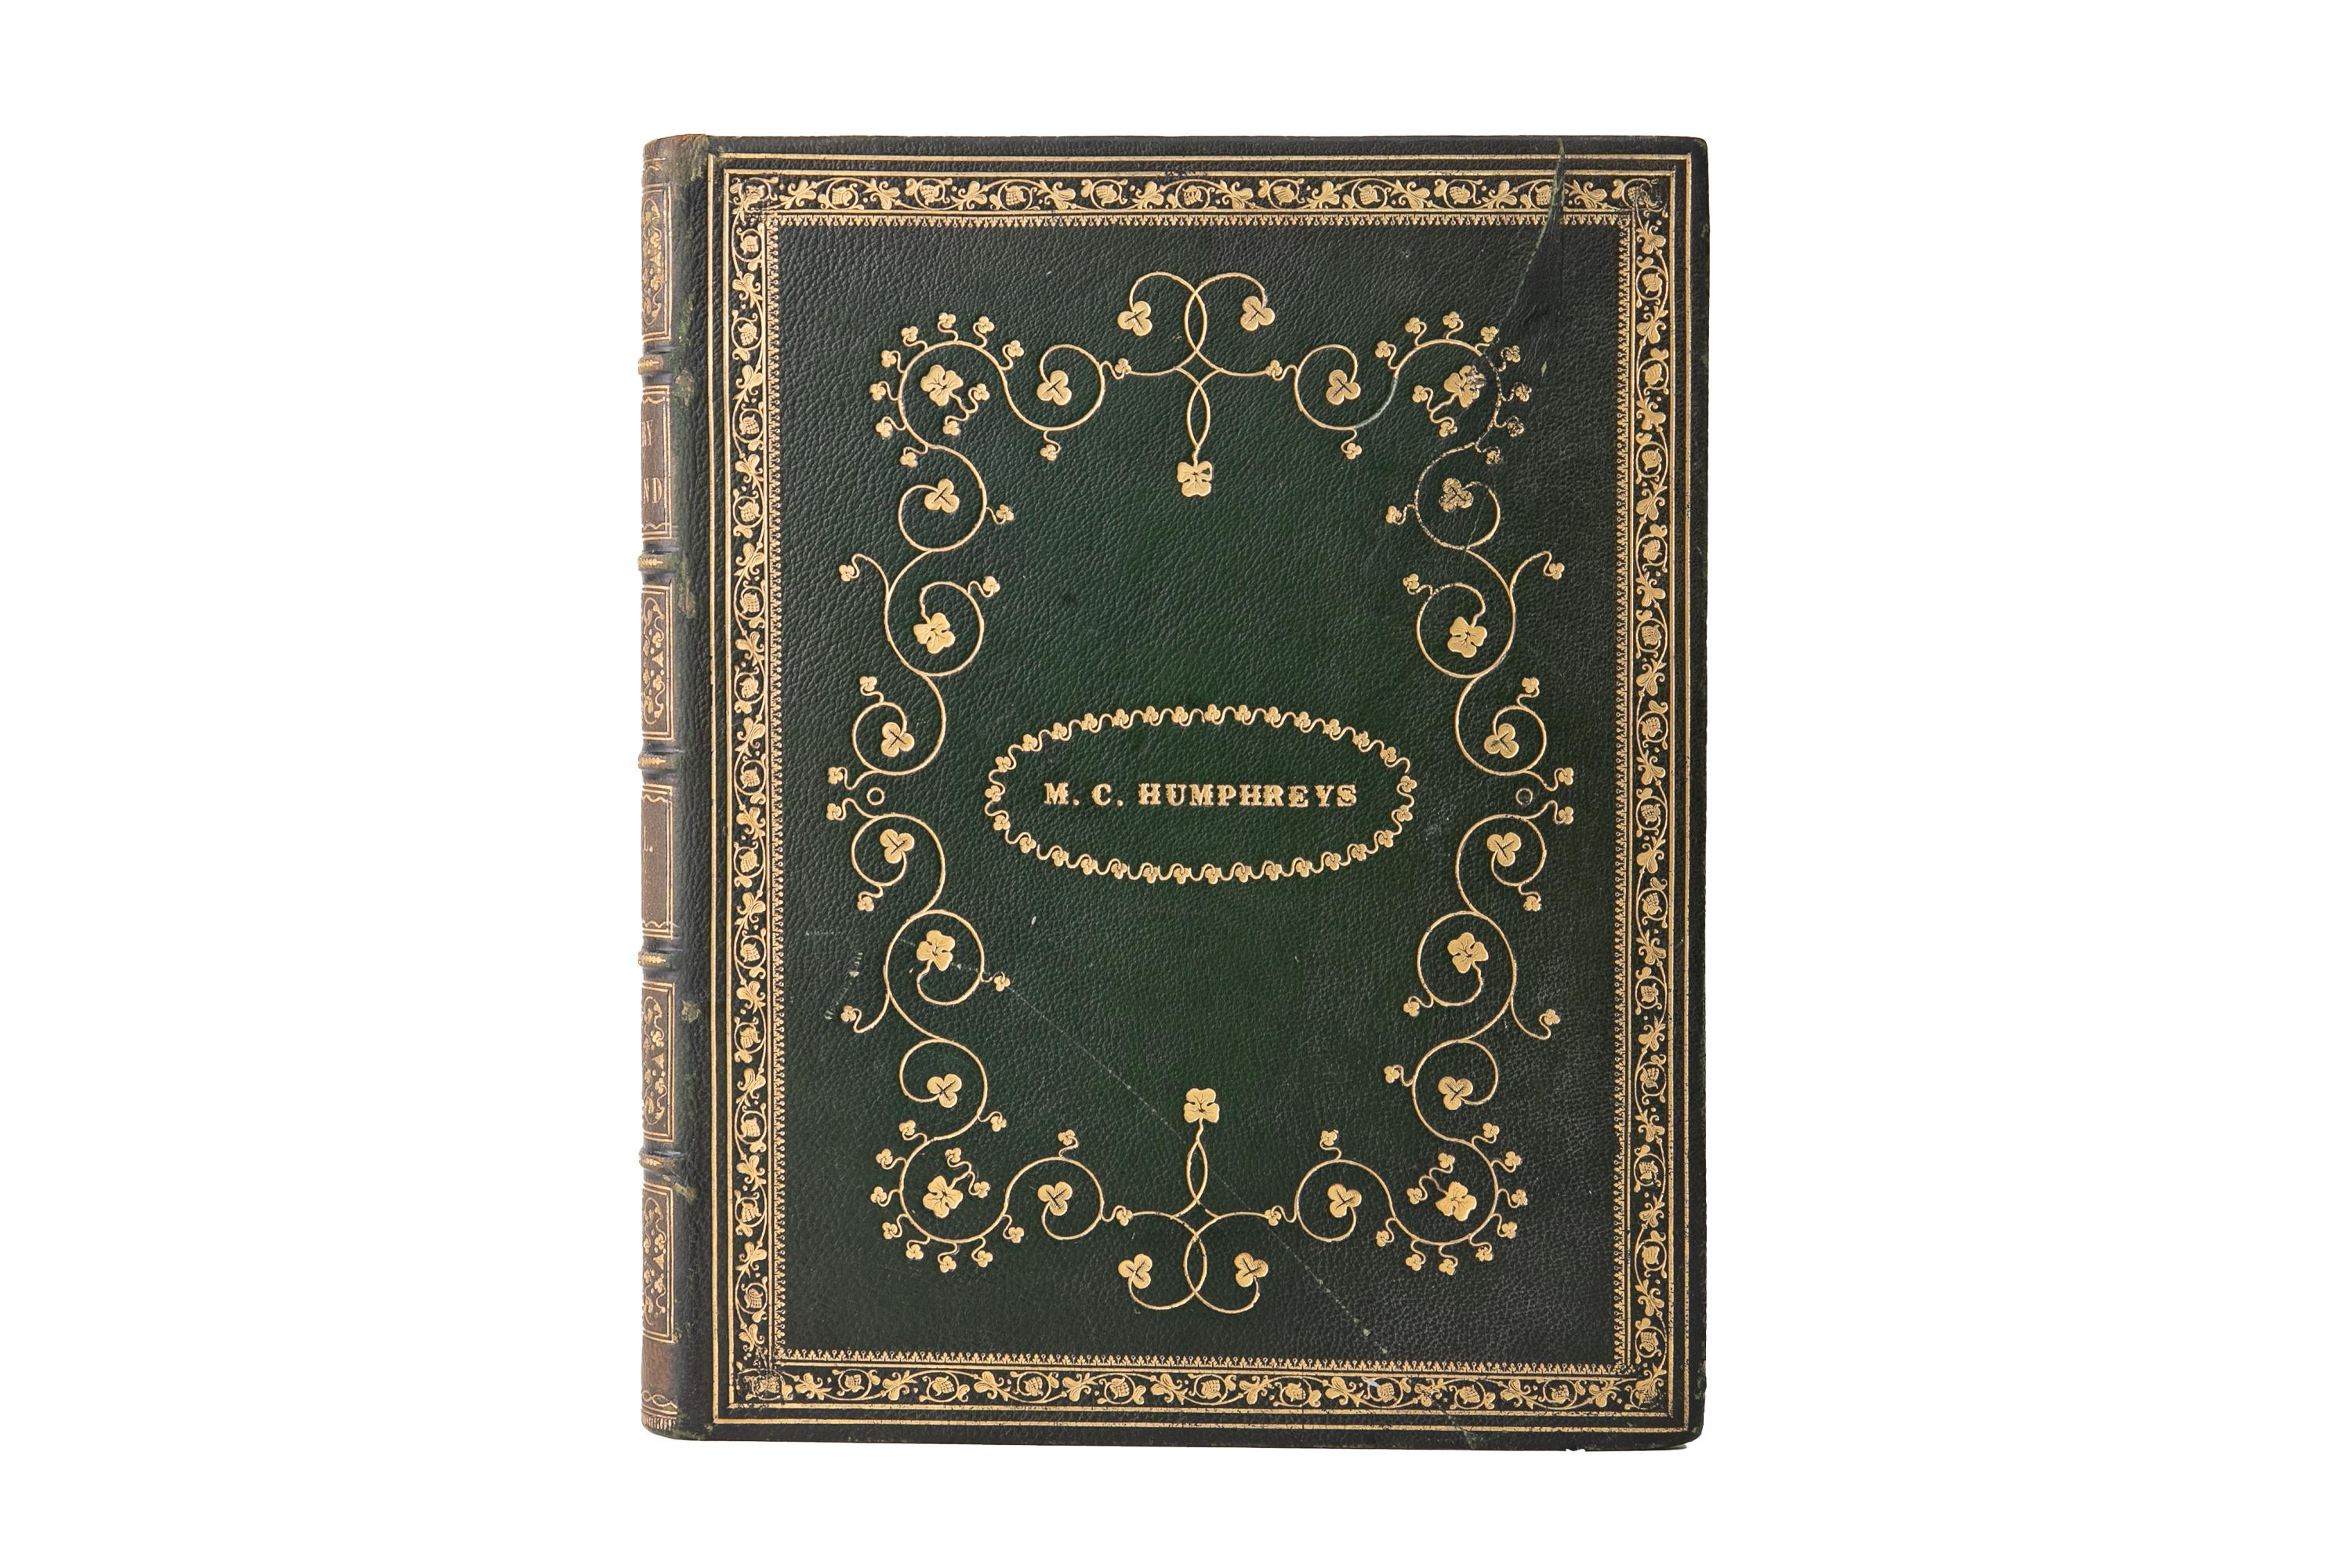 2 Volumes. N.P. Willis & J. Stirling Coyne, The Scenery and Antiquities of Ireland. Bound in full green morocco, gilt-tooled detailing, and raised band spines. All edges gilt with gilt-tooled dentelles. Drawings by W.H. Bartlett. London: George